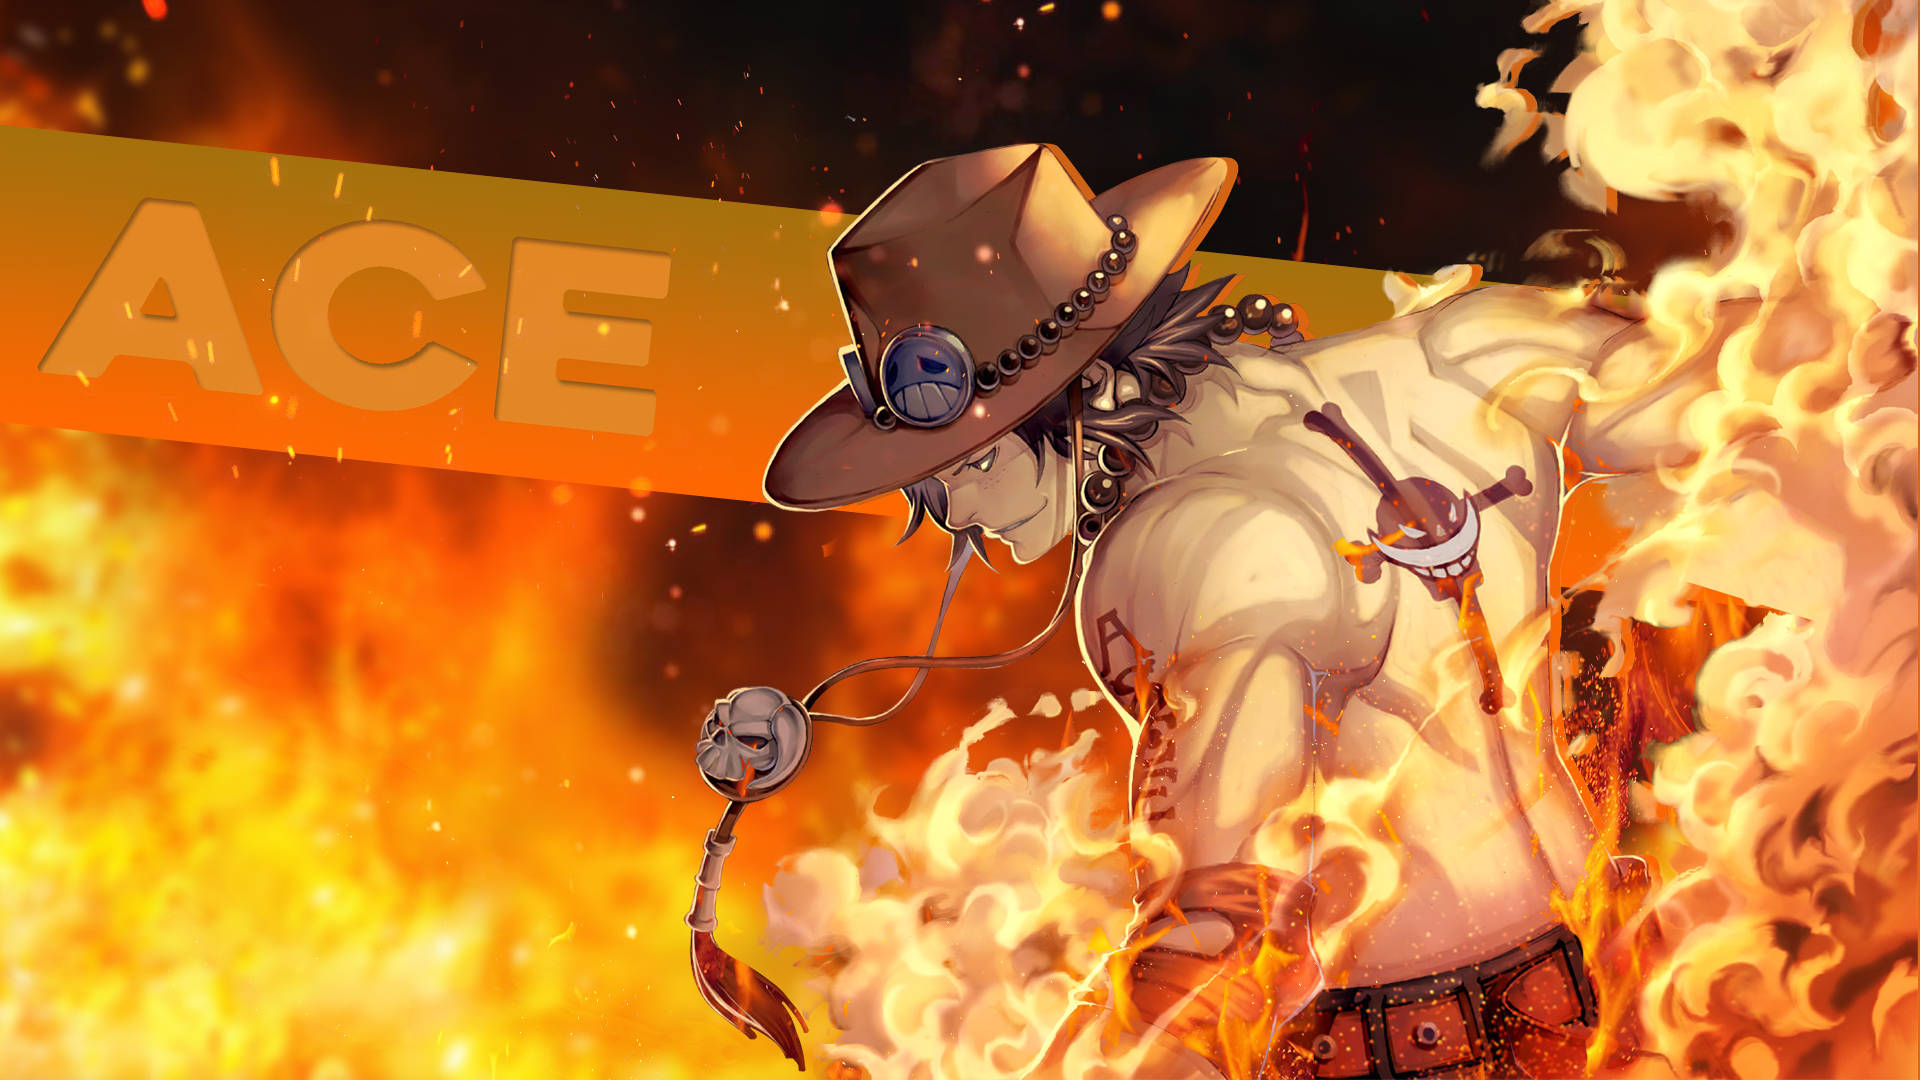 Download Fiery Ace Unleashed - One Piece Action Scene Wallpaper ...